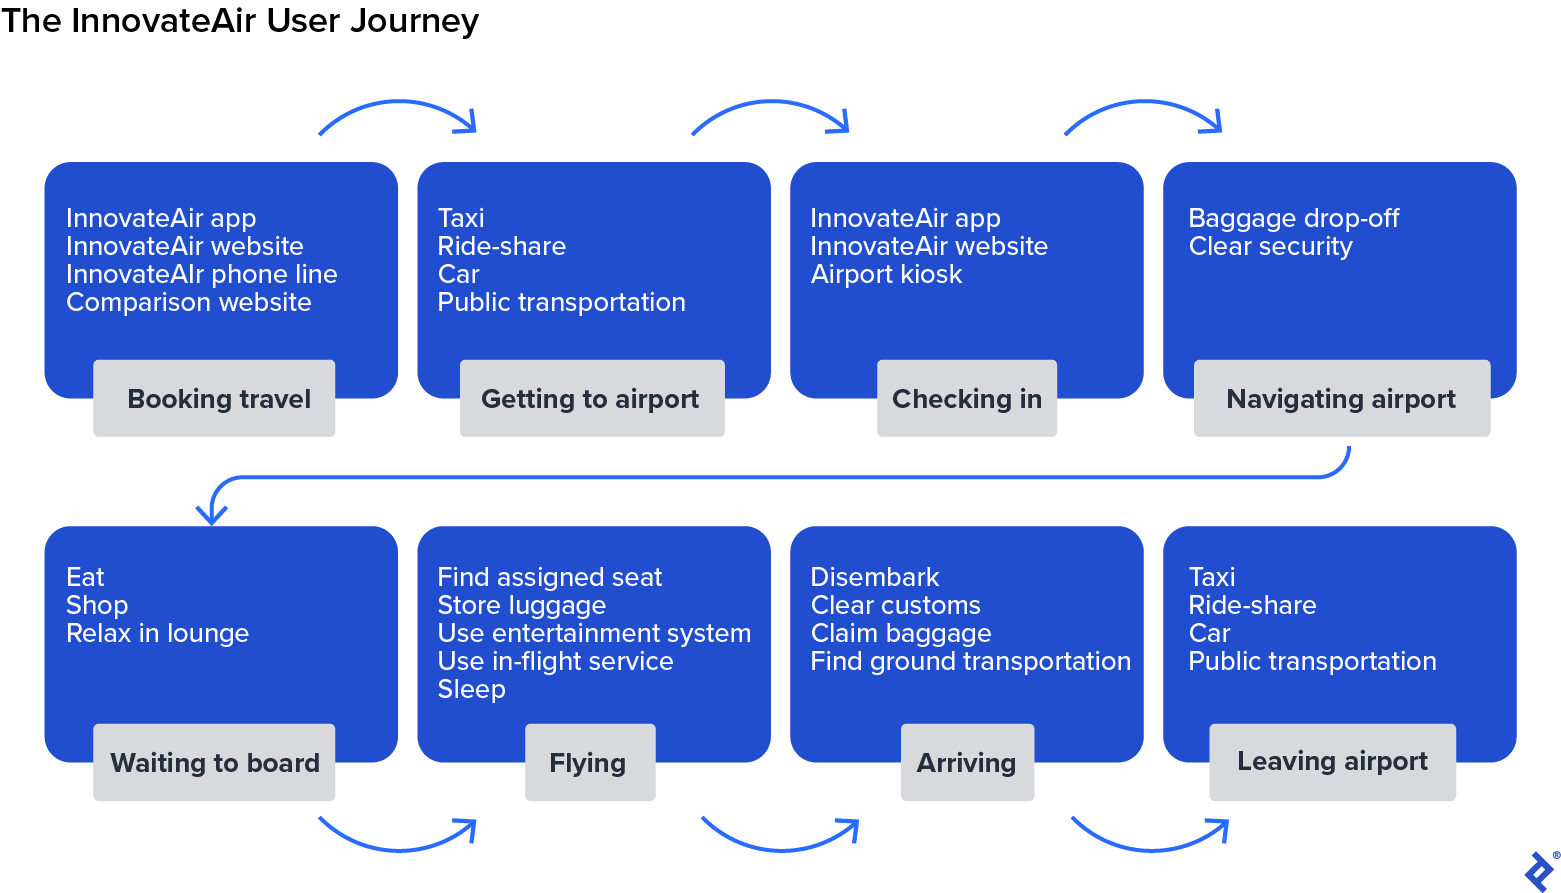 The user journey spans booking, travel to the airport, check-in, navigating the airport, waiting to board, flying, arrival, and leaving the airport.